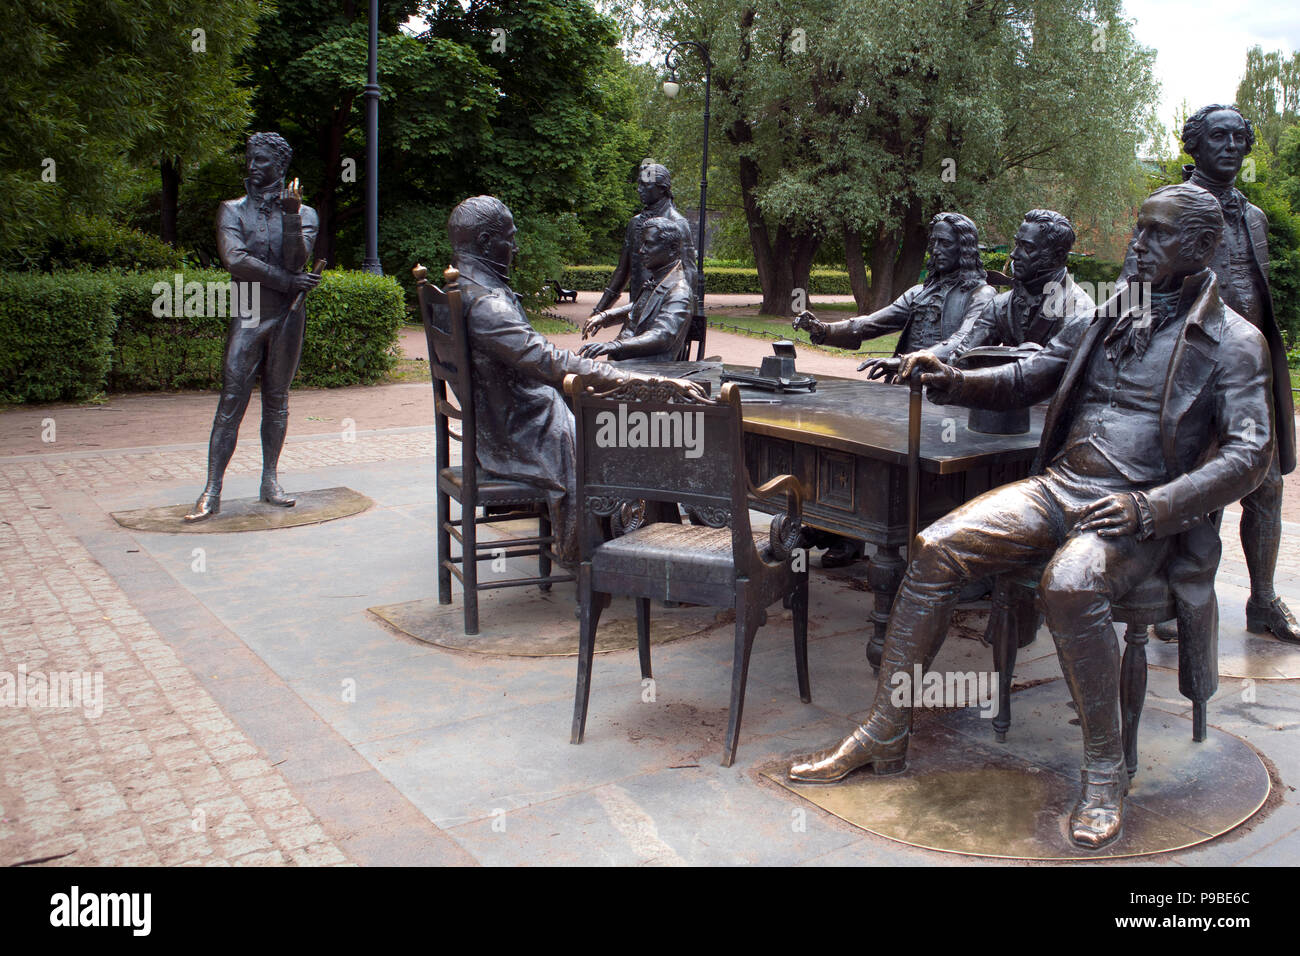 Saint-Petersburg, Russia, June 8, 2018. Sculptural ensemble depicting famous architects who took part in the construction of Saint-Petersburg Stock Photo